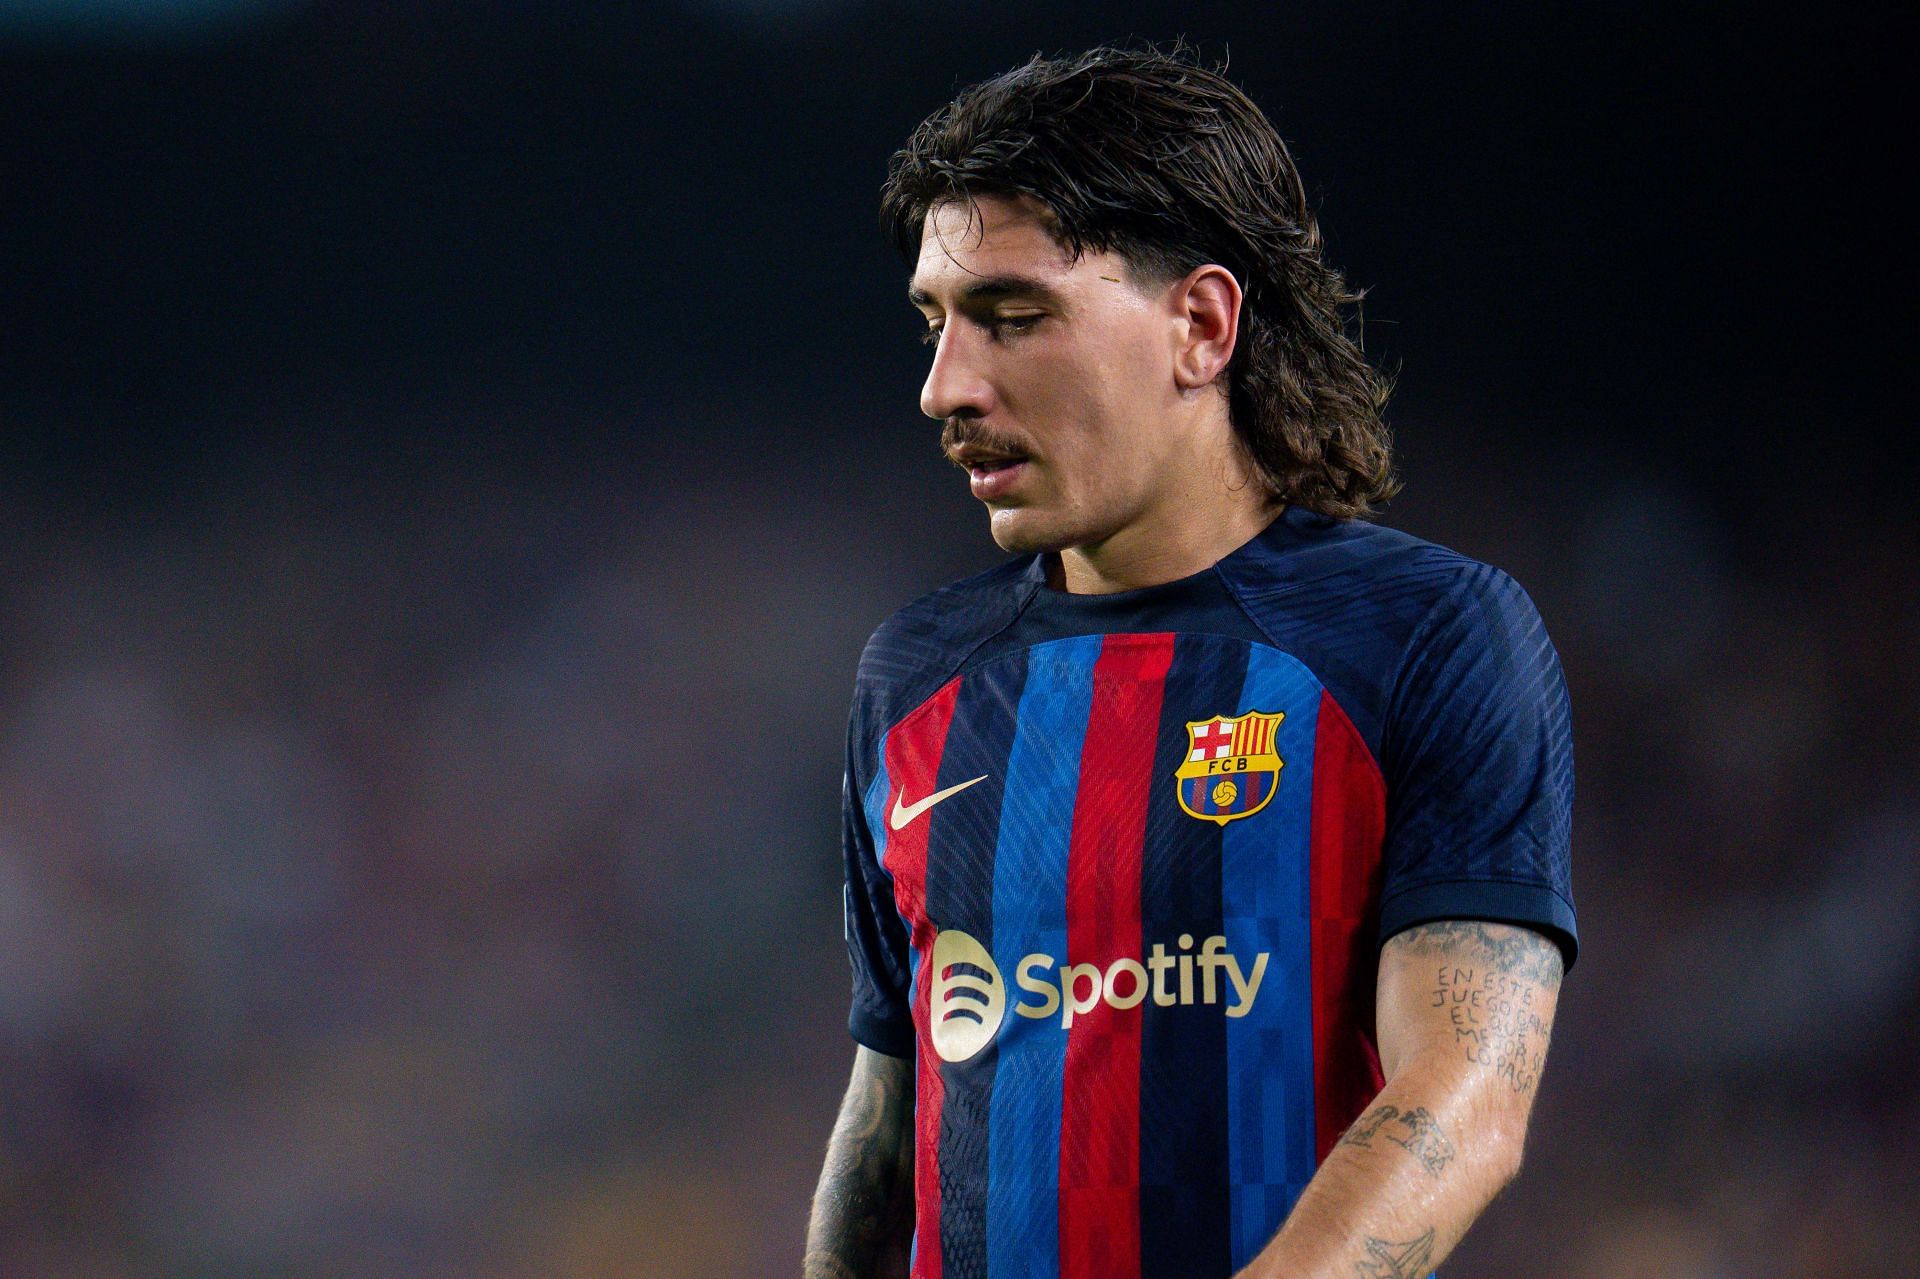 Barcelona Transfer News Roundup: Barca looking to sign Manchester United  forward on deadline day, Club make loan-plus-buy offer for World Cup star  and more - 31 January 2023